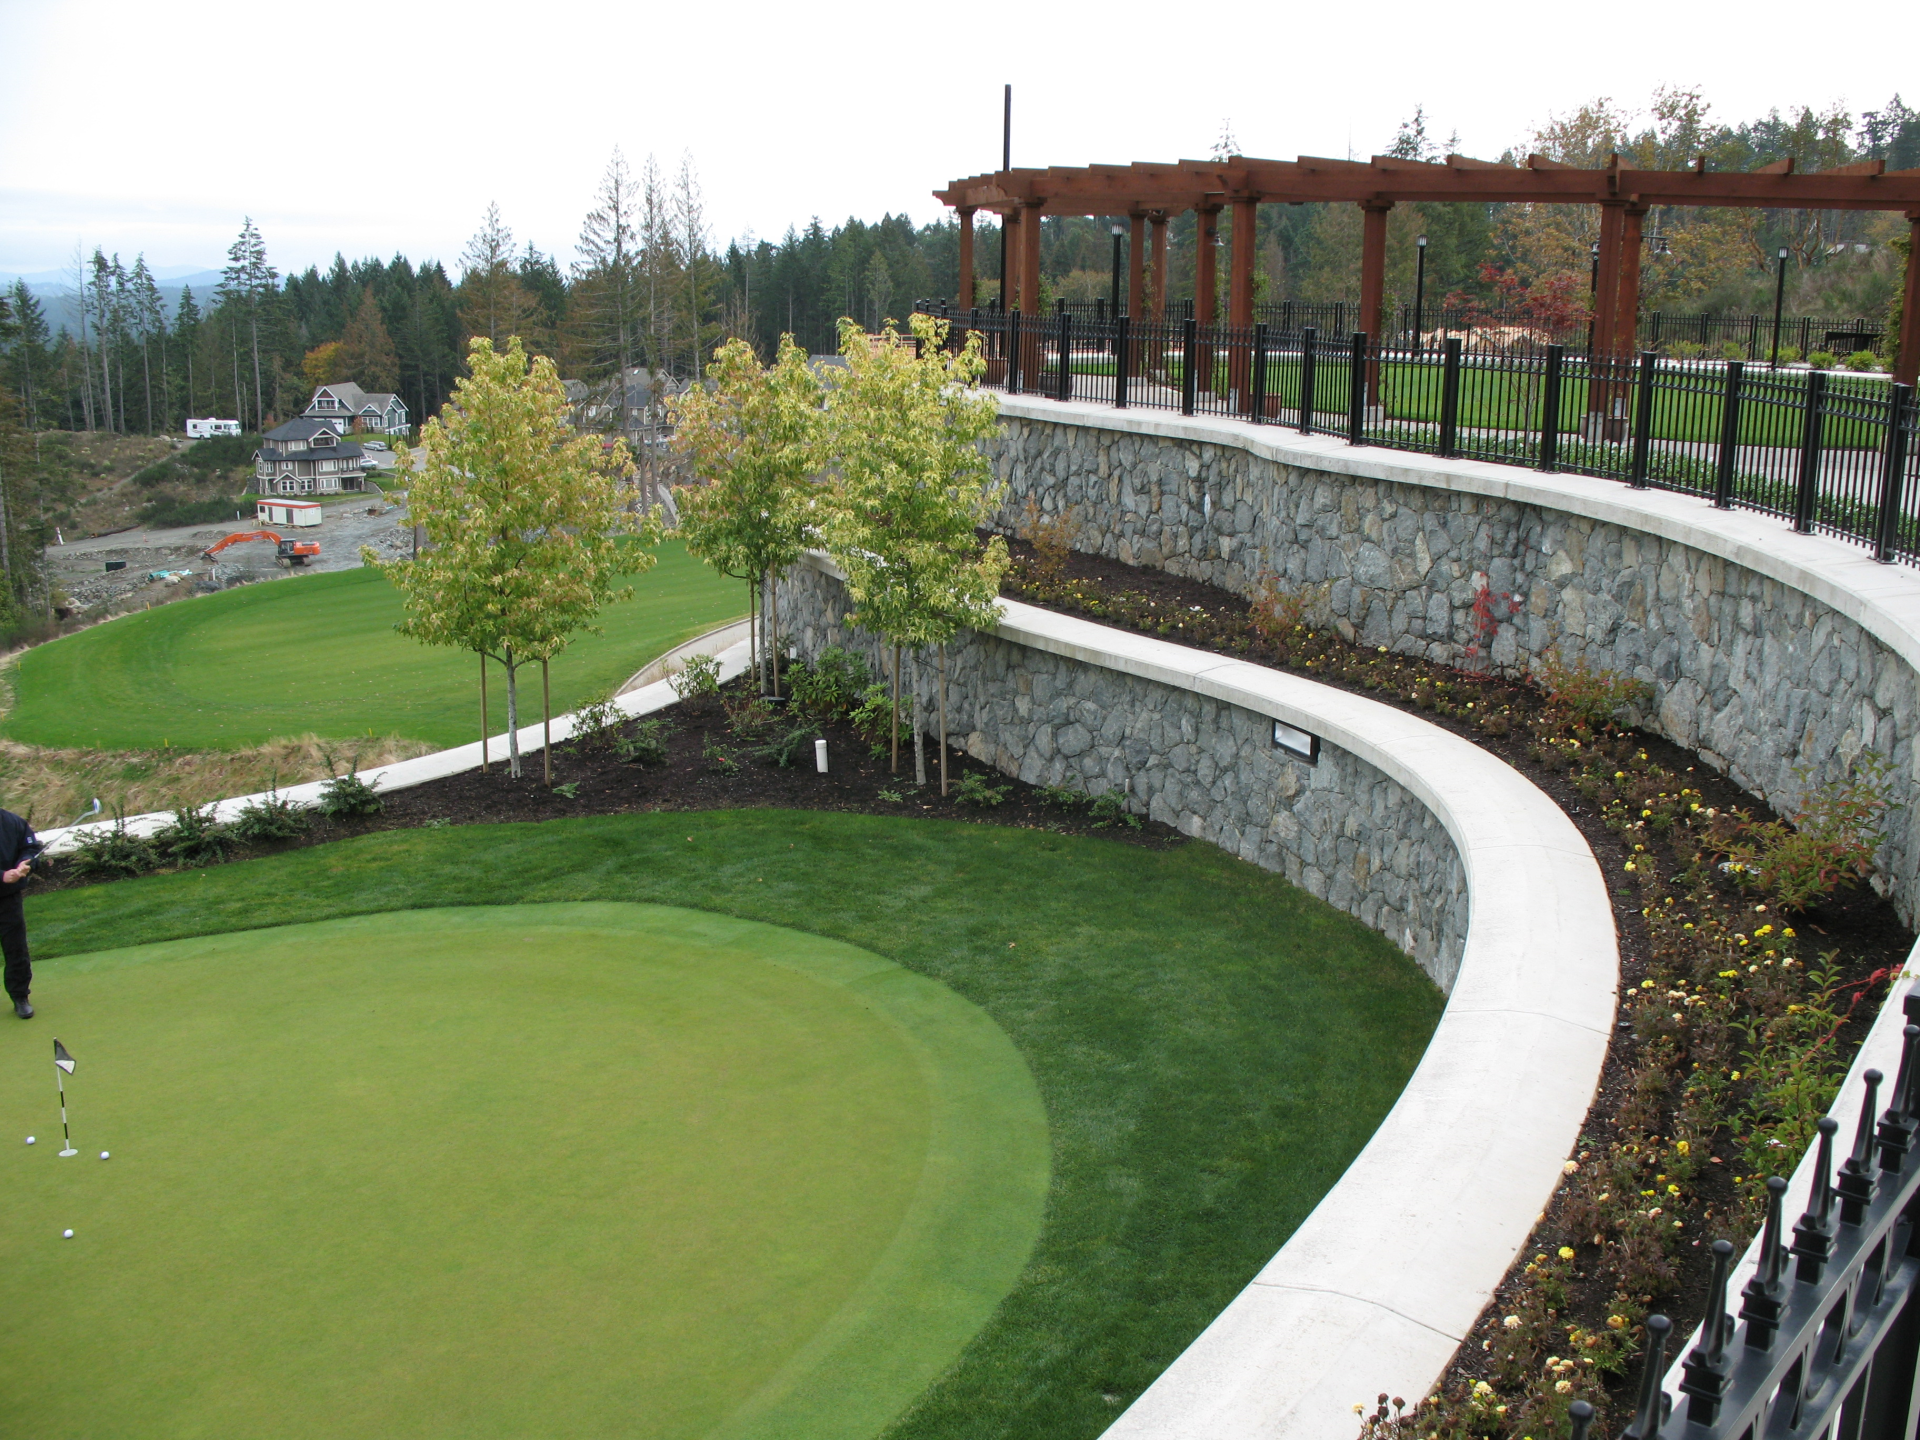 Commercial retaining wall constructed for local golf course in Langford BC